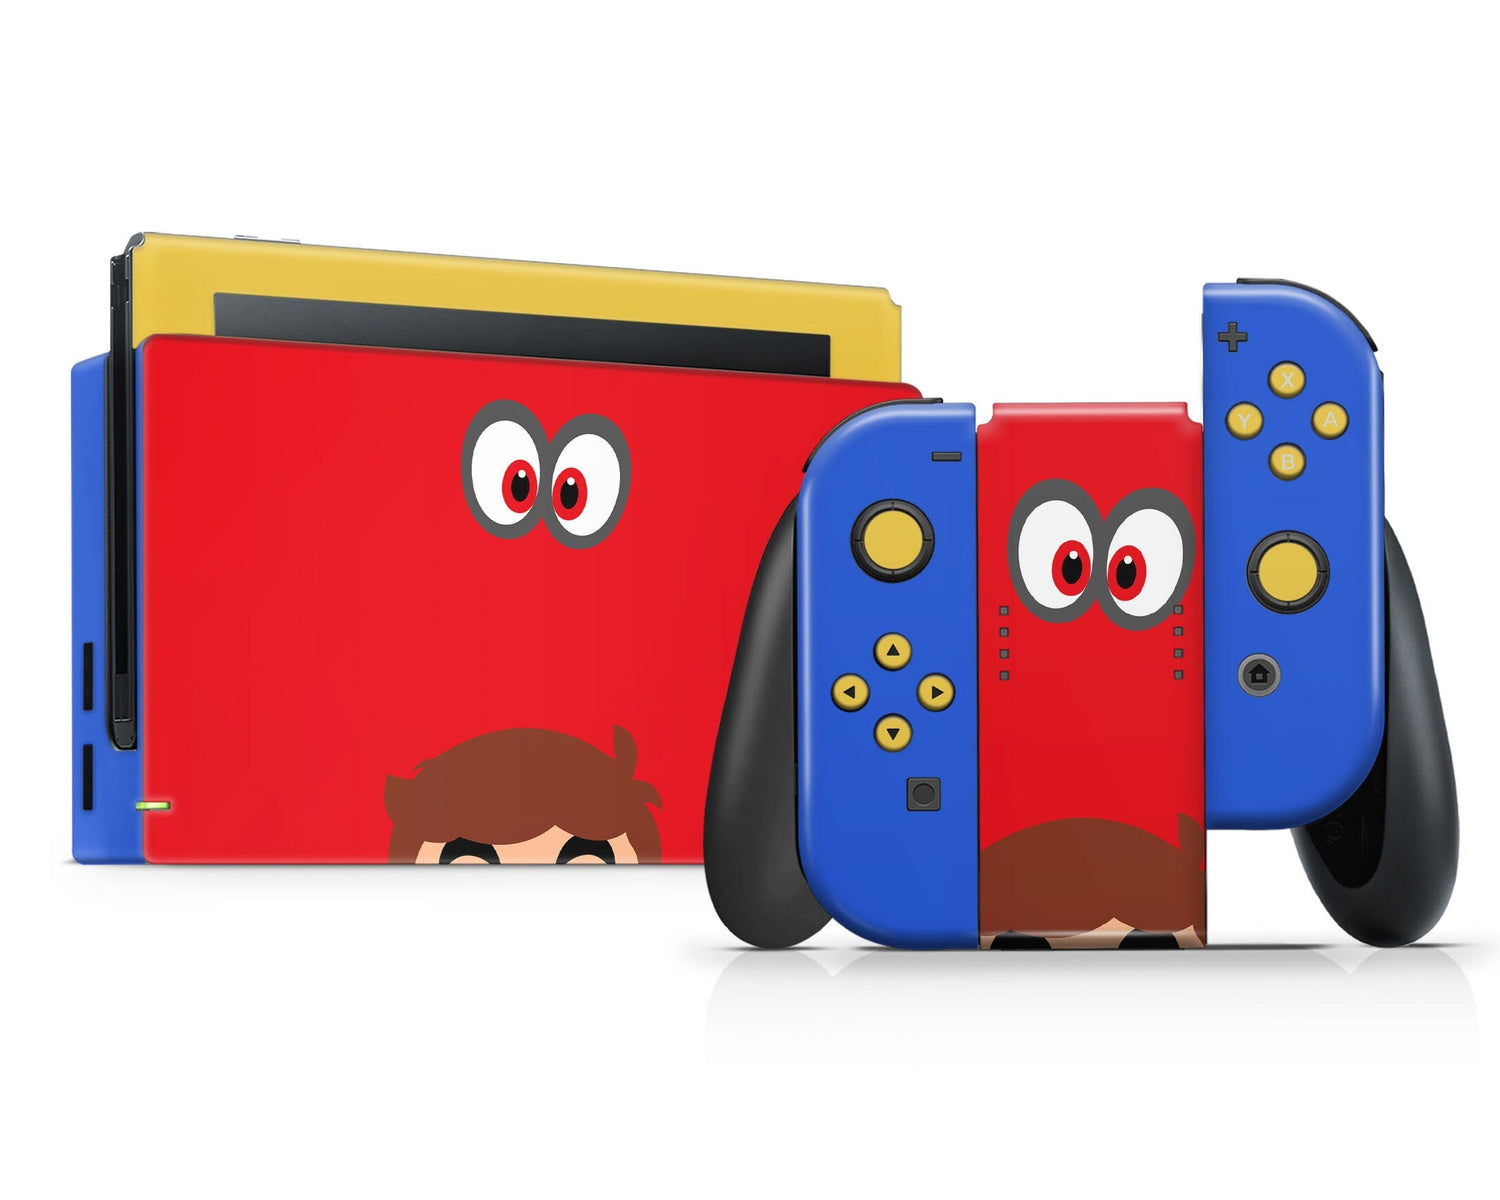 Super Mario Odyssey Vinyl Skin Decals Stickers for Regular PS4 Console  Stickers